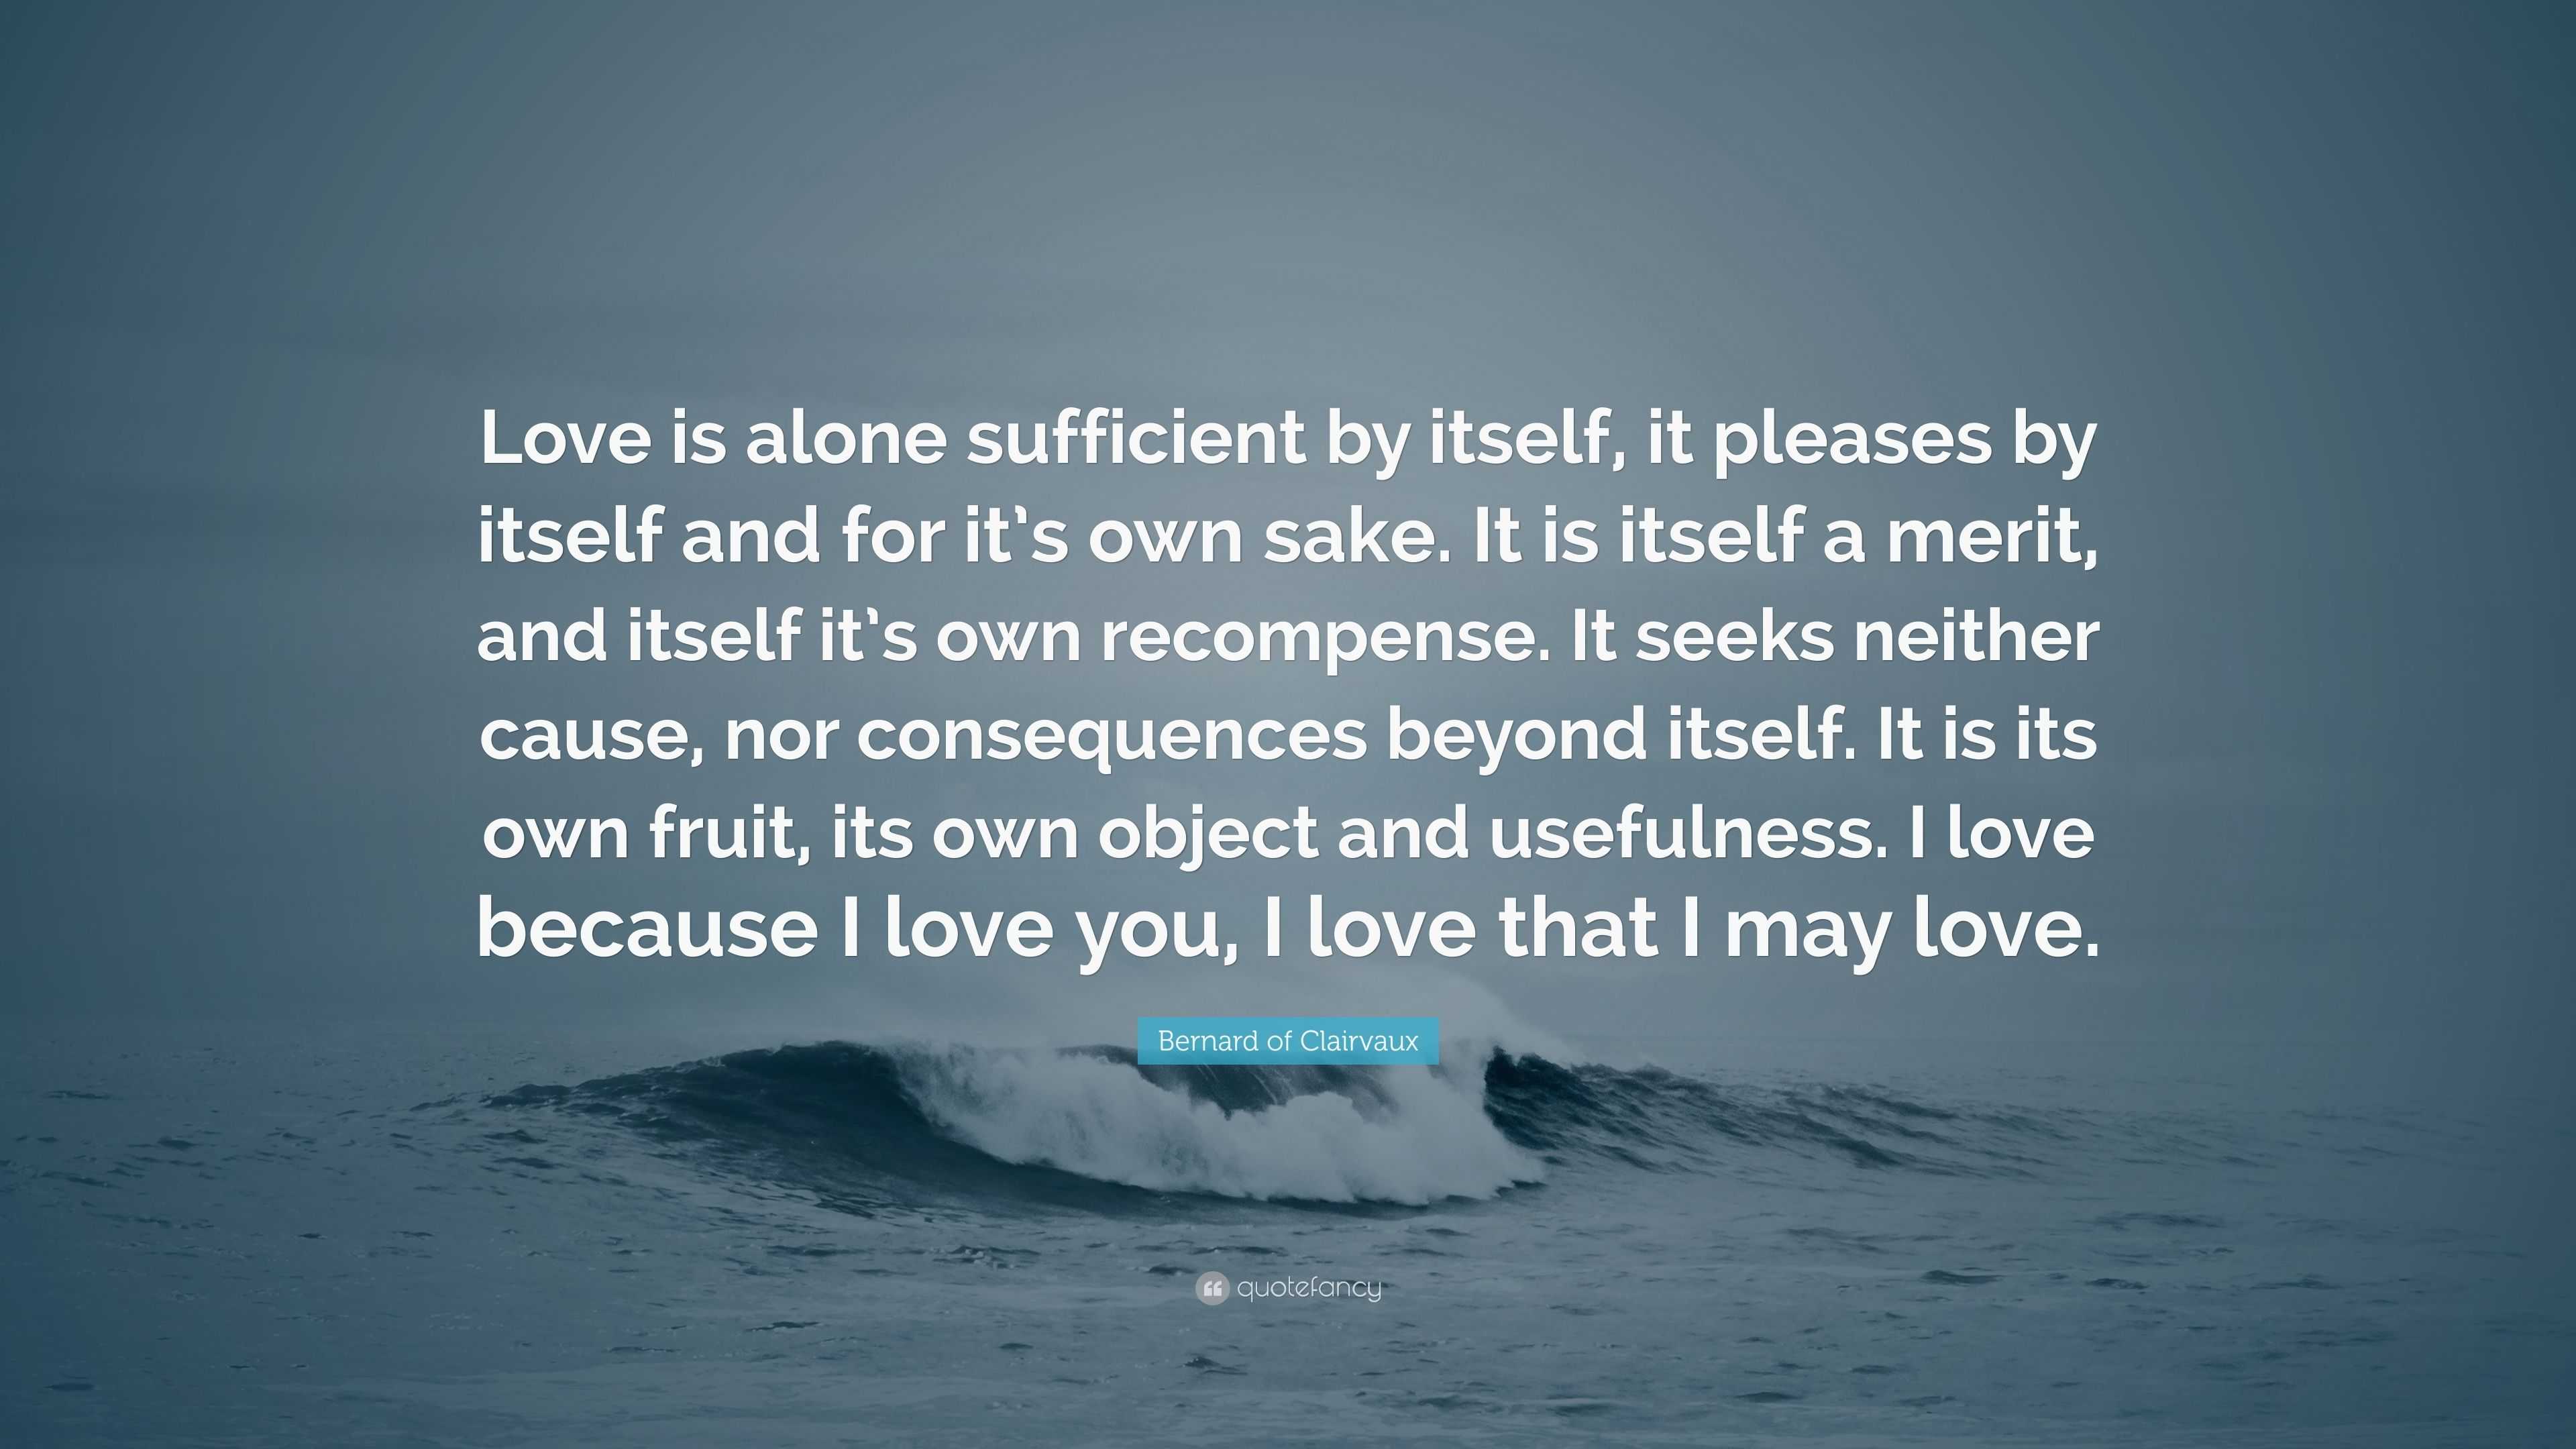 Bernard of Clairvaux Quote: “Love is alone sufficient by itself, it ...